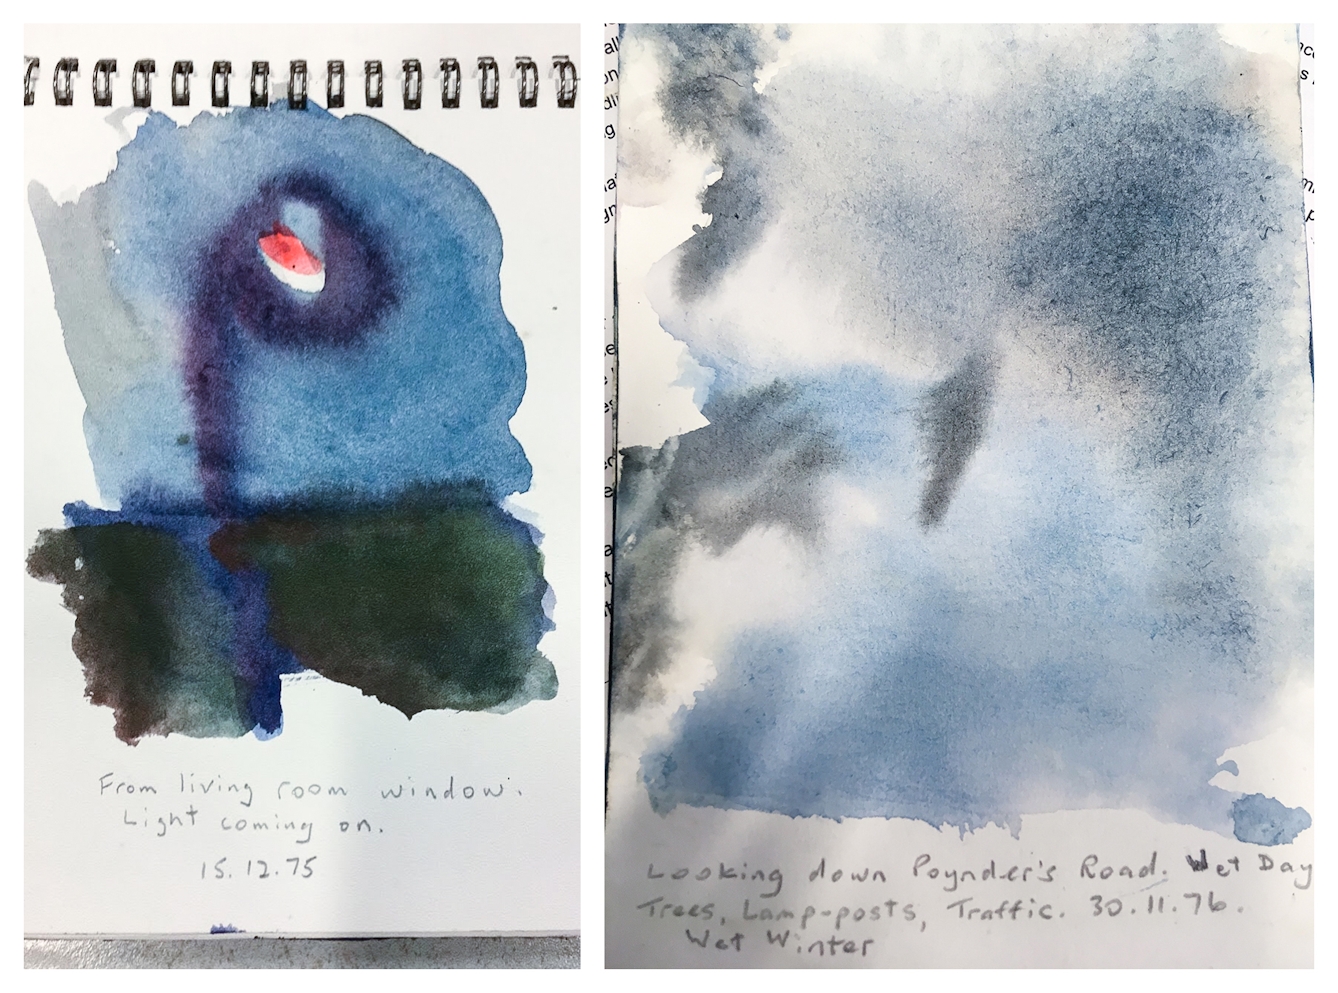 Photographic diptych. Both images show an abstract watercolour artwork, made in a small spiral bound sketchbook. On the left the tones are blues and blacks which swirl around a bright red mark in the centre. At the bottom of the page is the handwritten title, 'From living room window. Light coming on. 15.12.75' The image on the right shows a blue and black colour wash which covers almost the whole page. At the bottom of the page is the handwritten title, 'Looking down Poynder's Road. Wet day. Trees, lamp posts, traffic. 30.11.76. Wet winter.